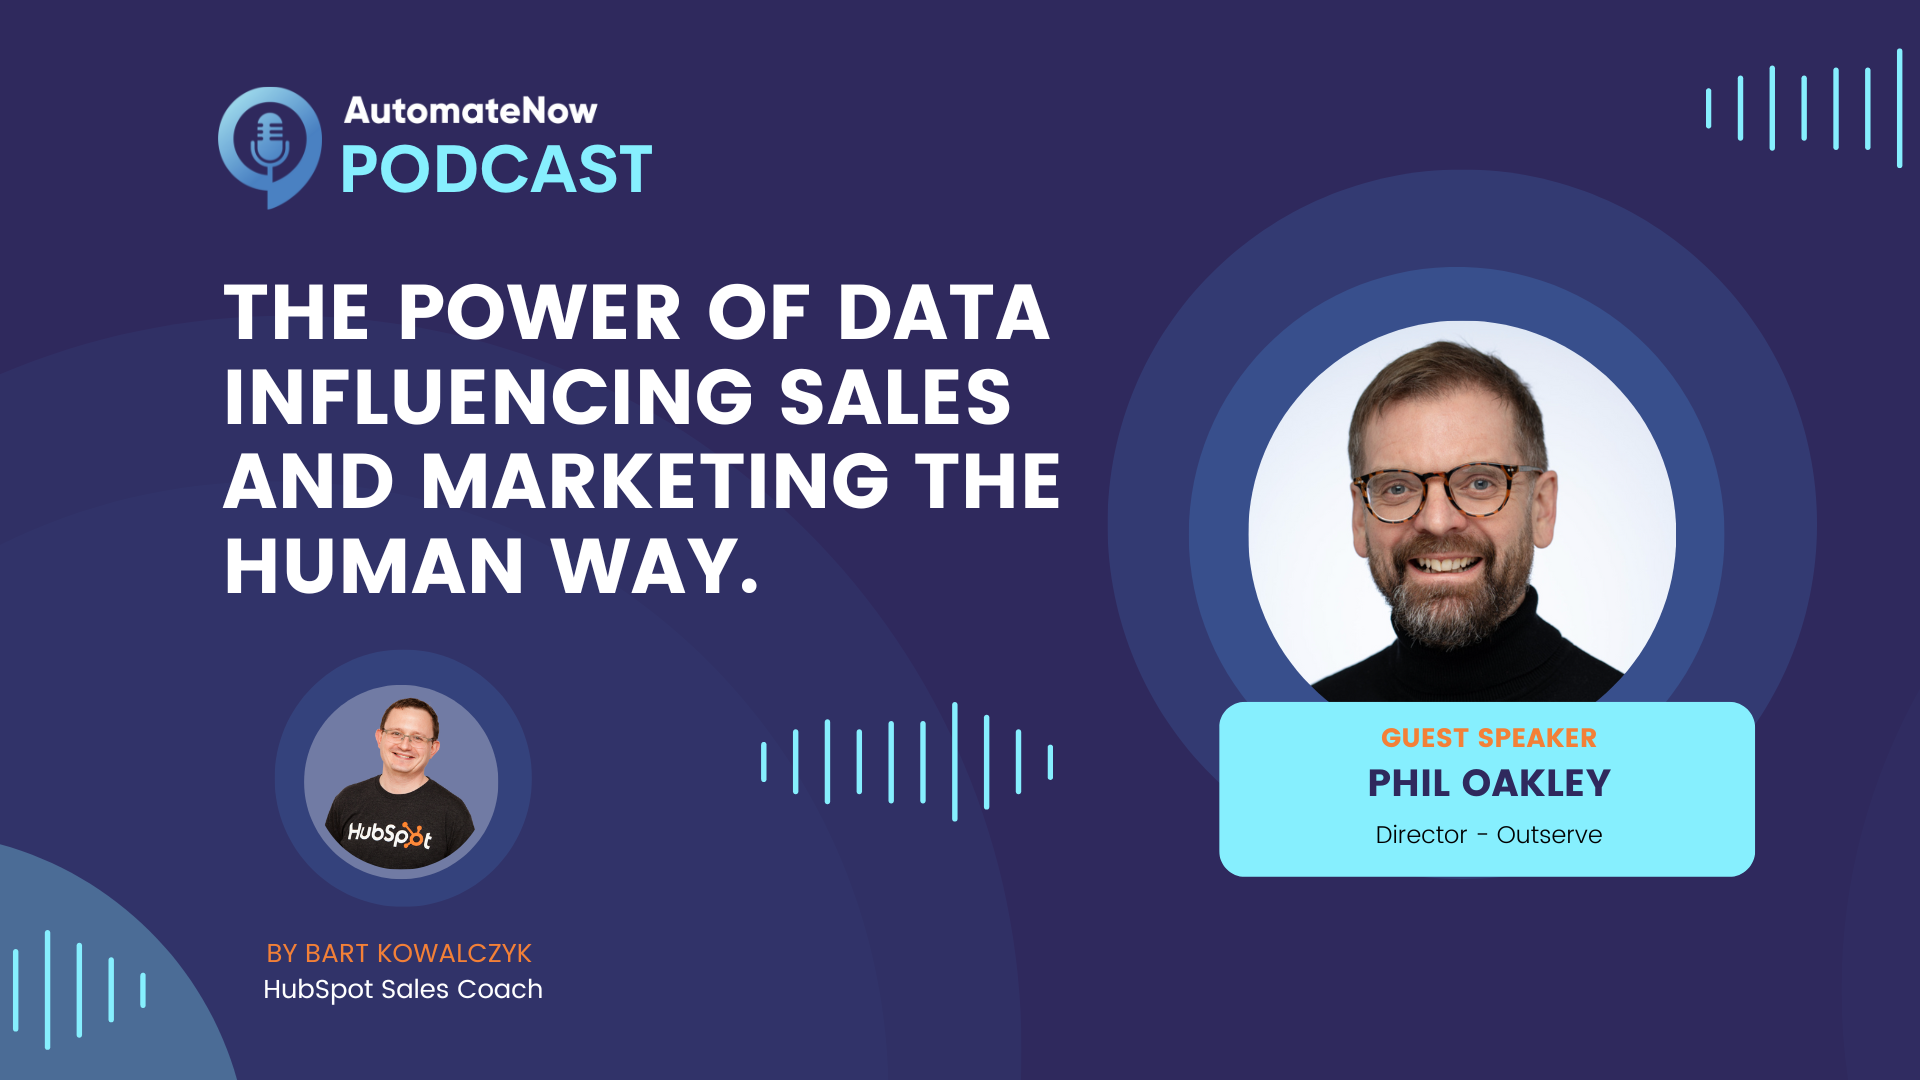 Podcast: The Power of Data: Influencing Sales and Marketing the Human Way